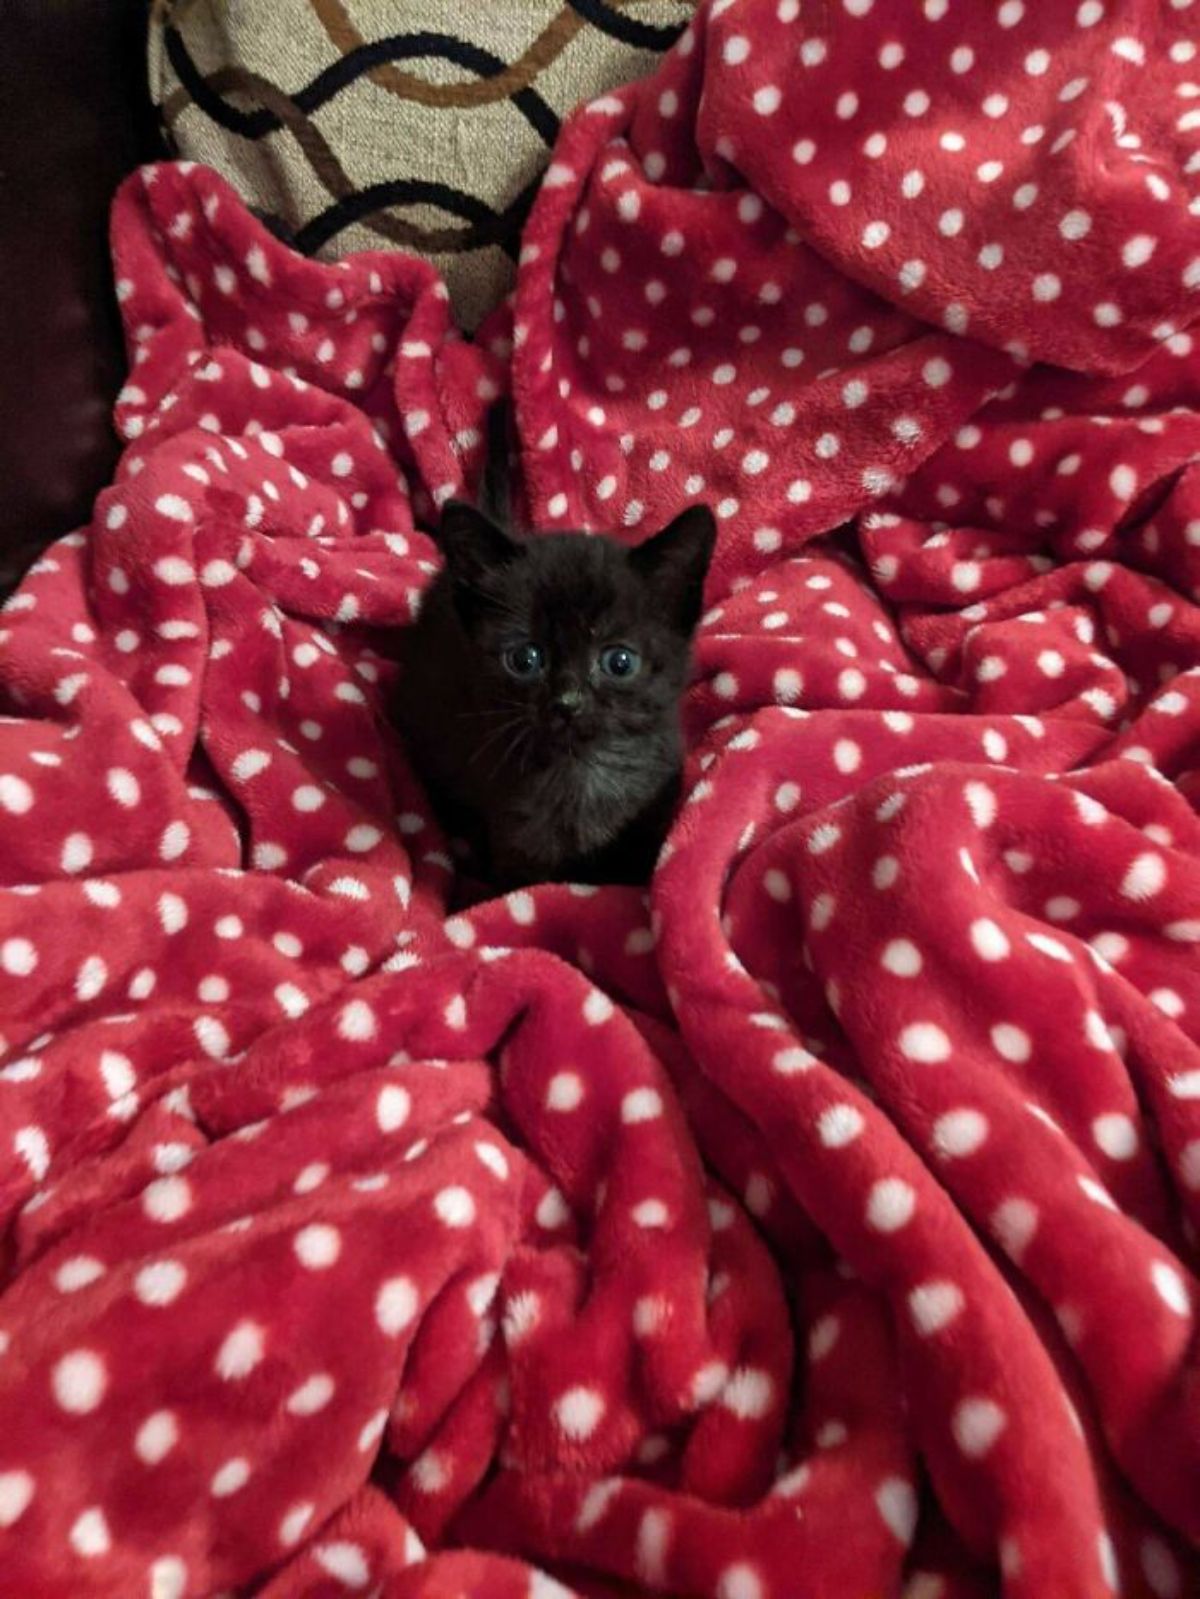 black kitten sitting on a red blanket with white polka dots